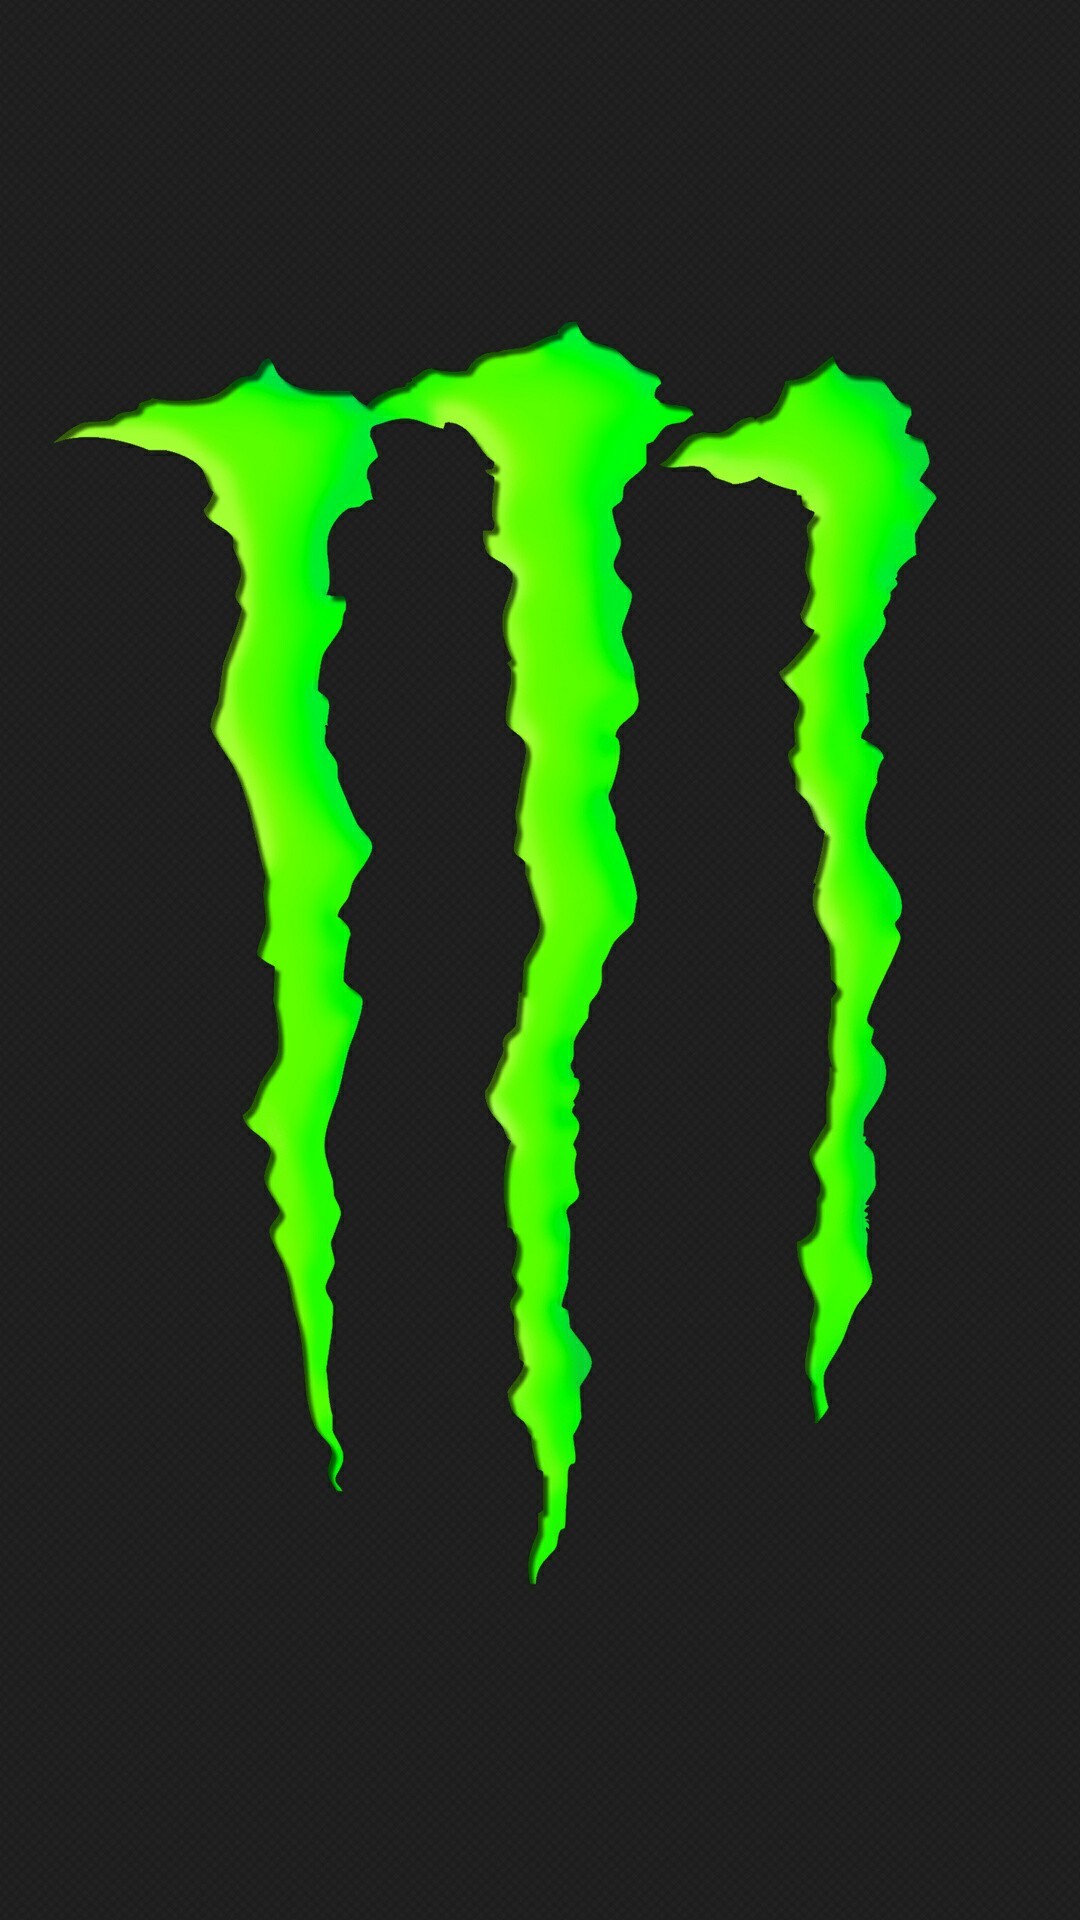 1080x1920 Monster energy drink came to Cape Town and i love it so much, especially  the logo, i had to draw some stuff for it. First of many.